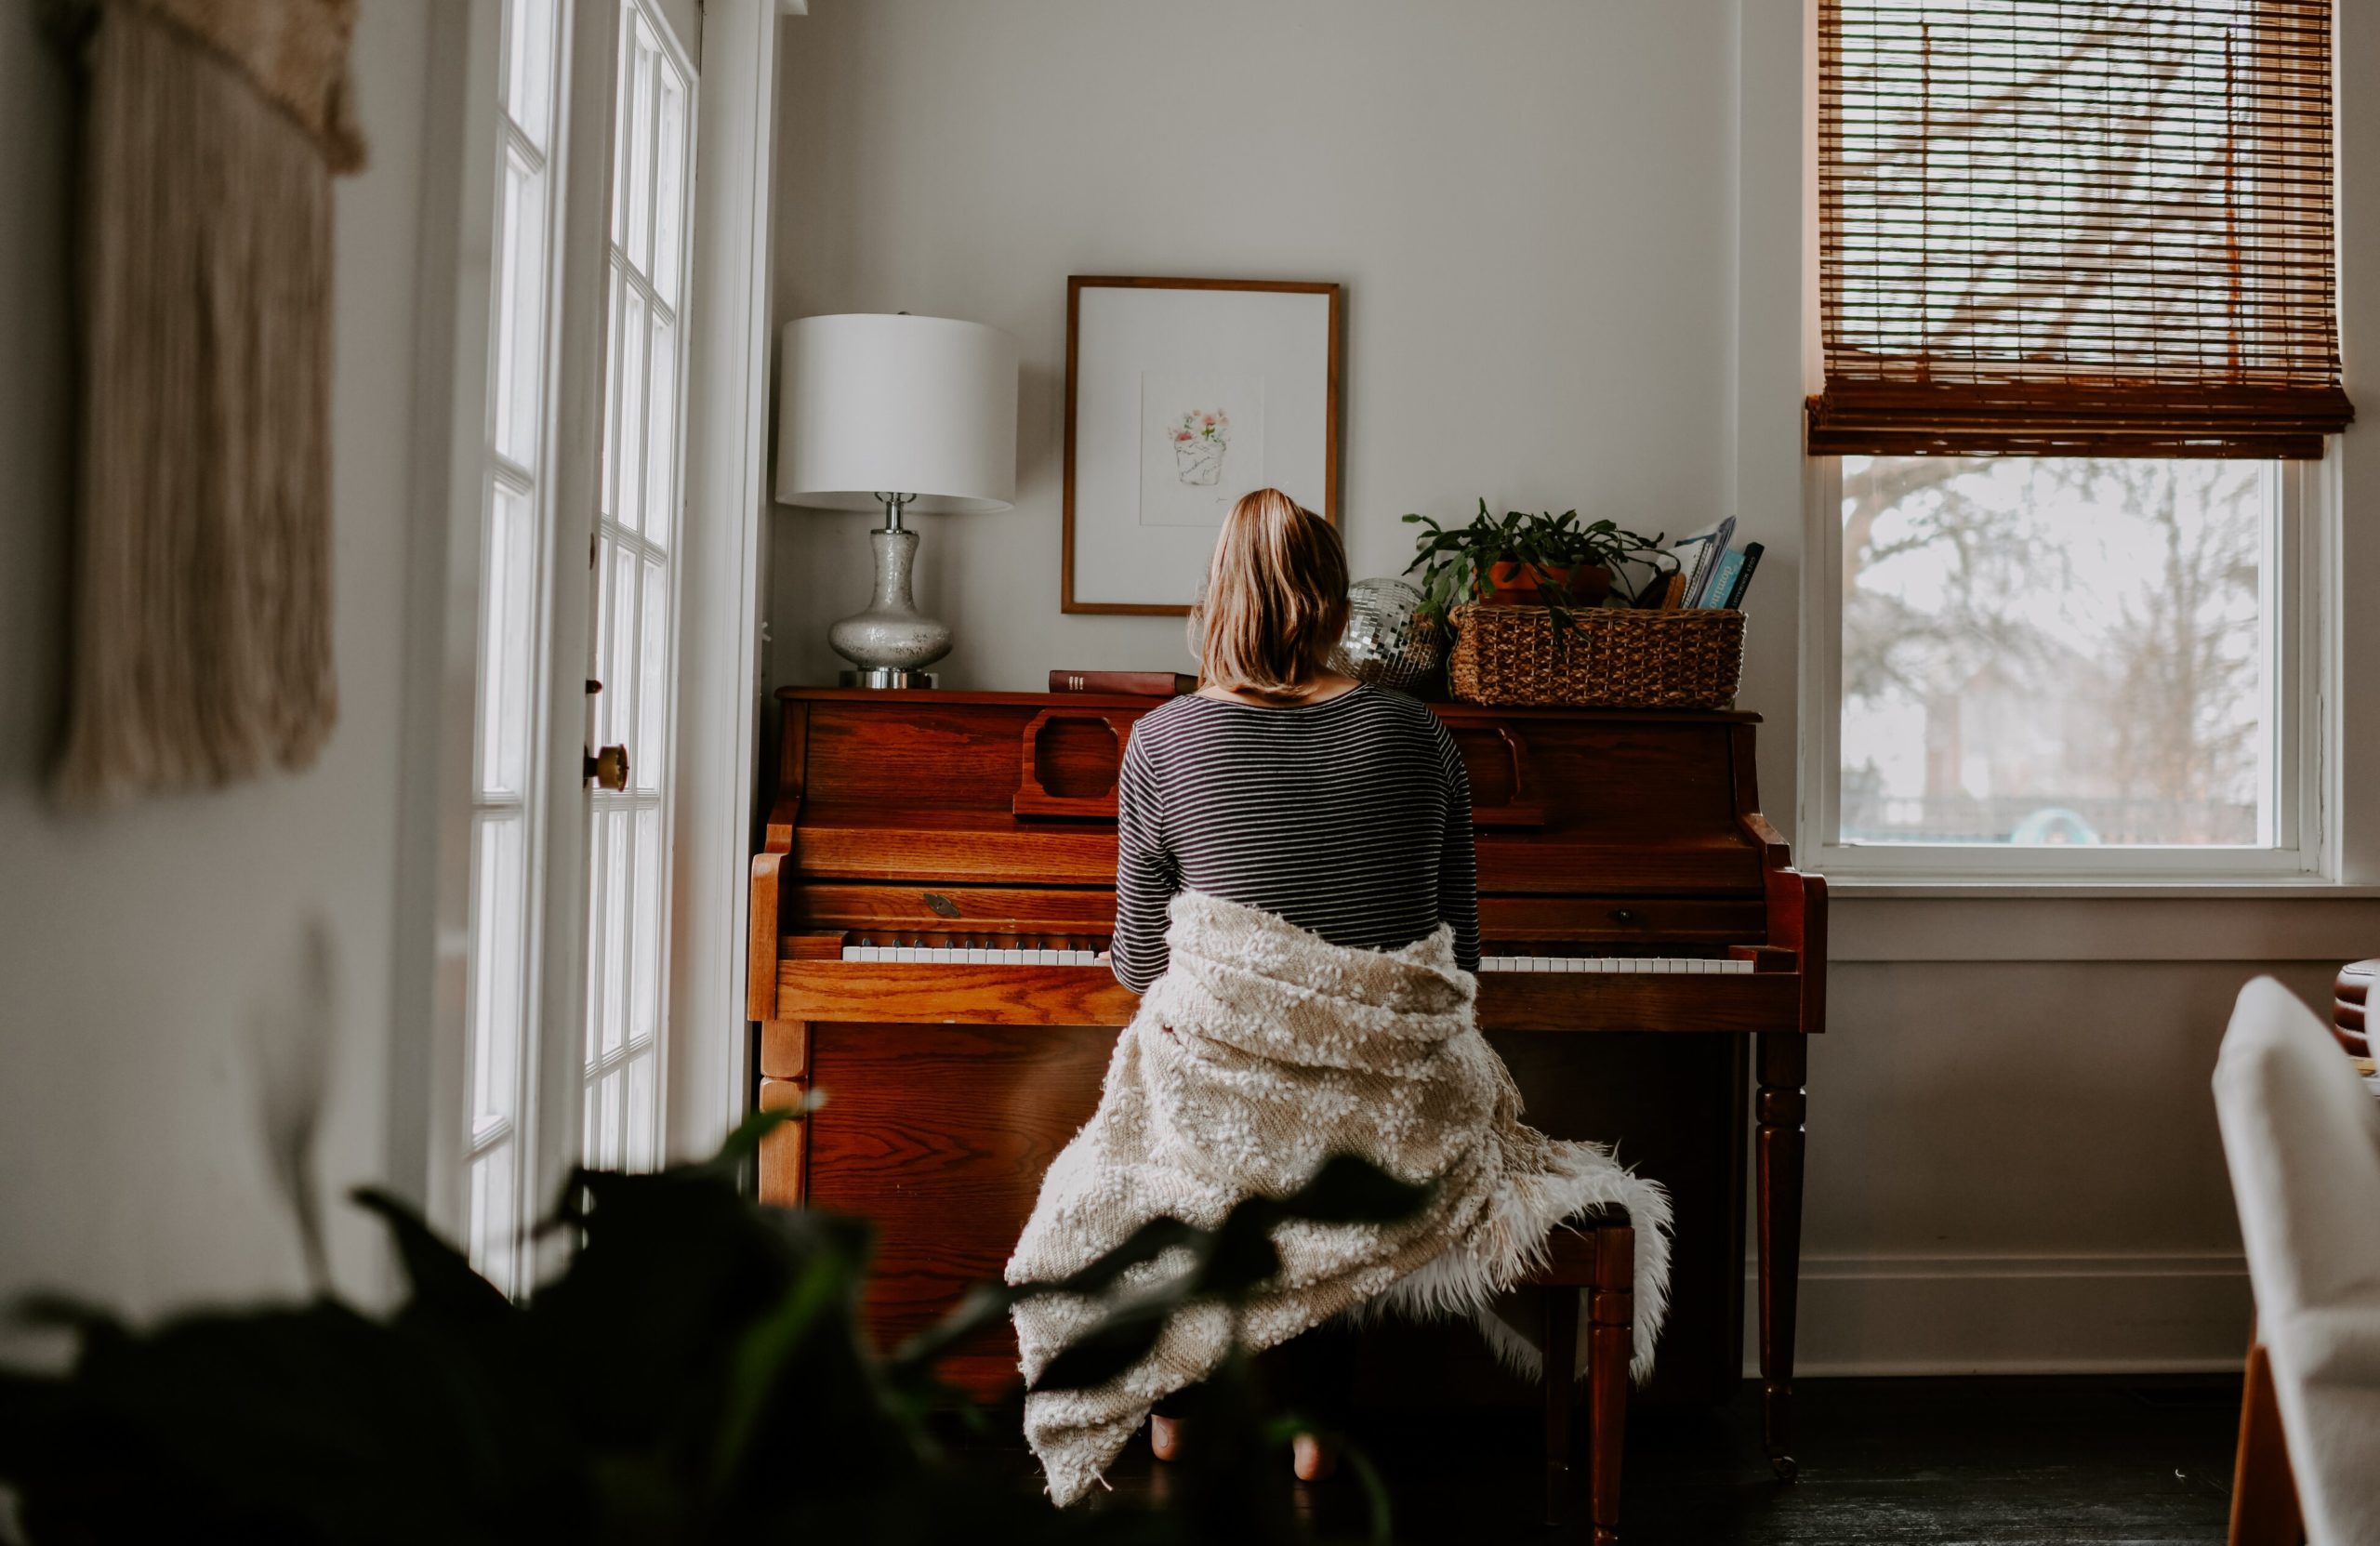 Create space by selling your piano